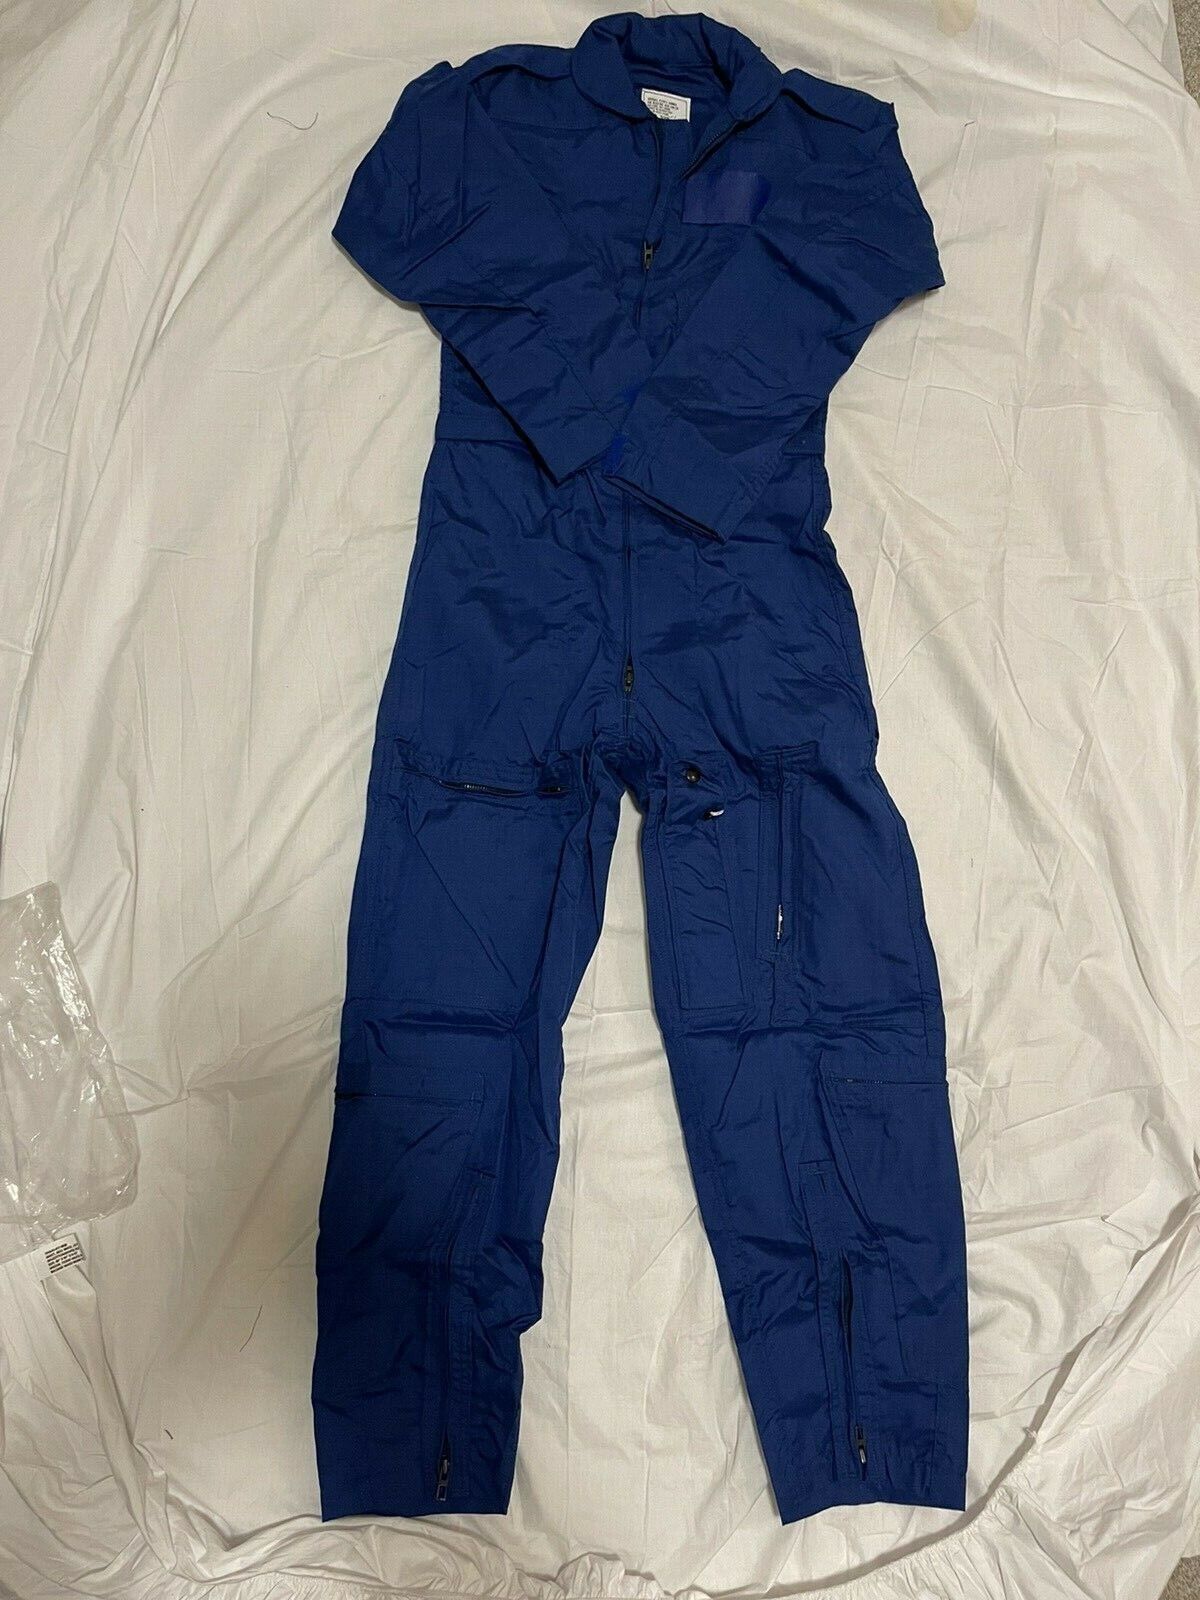 USAF Flyers Coverall ,Fire Resistant Aramid CWU-73P Blue size 32Short